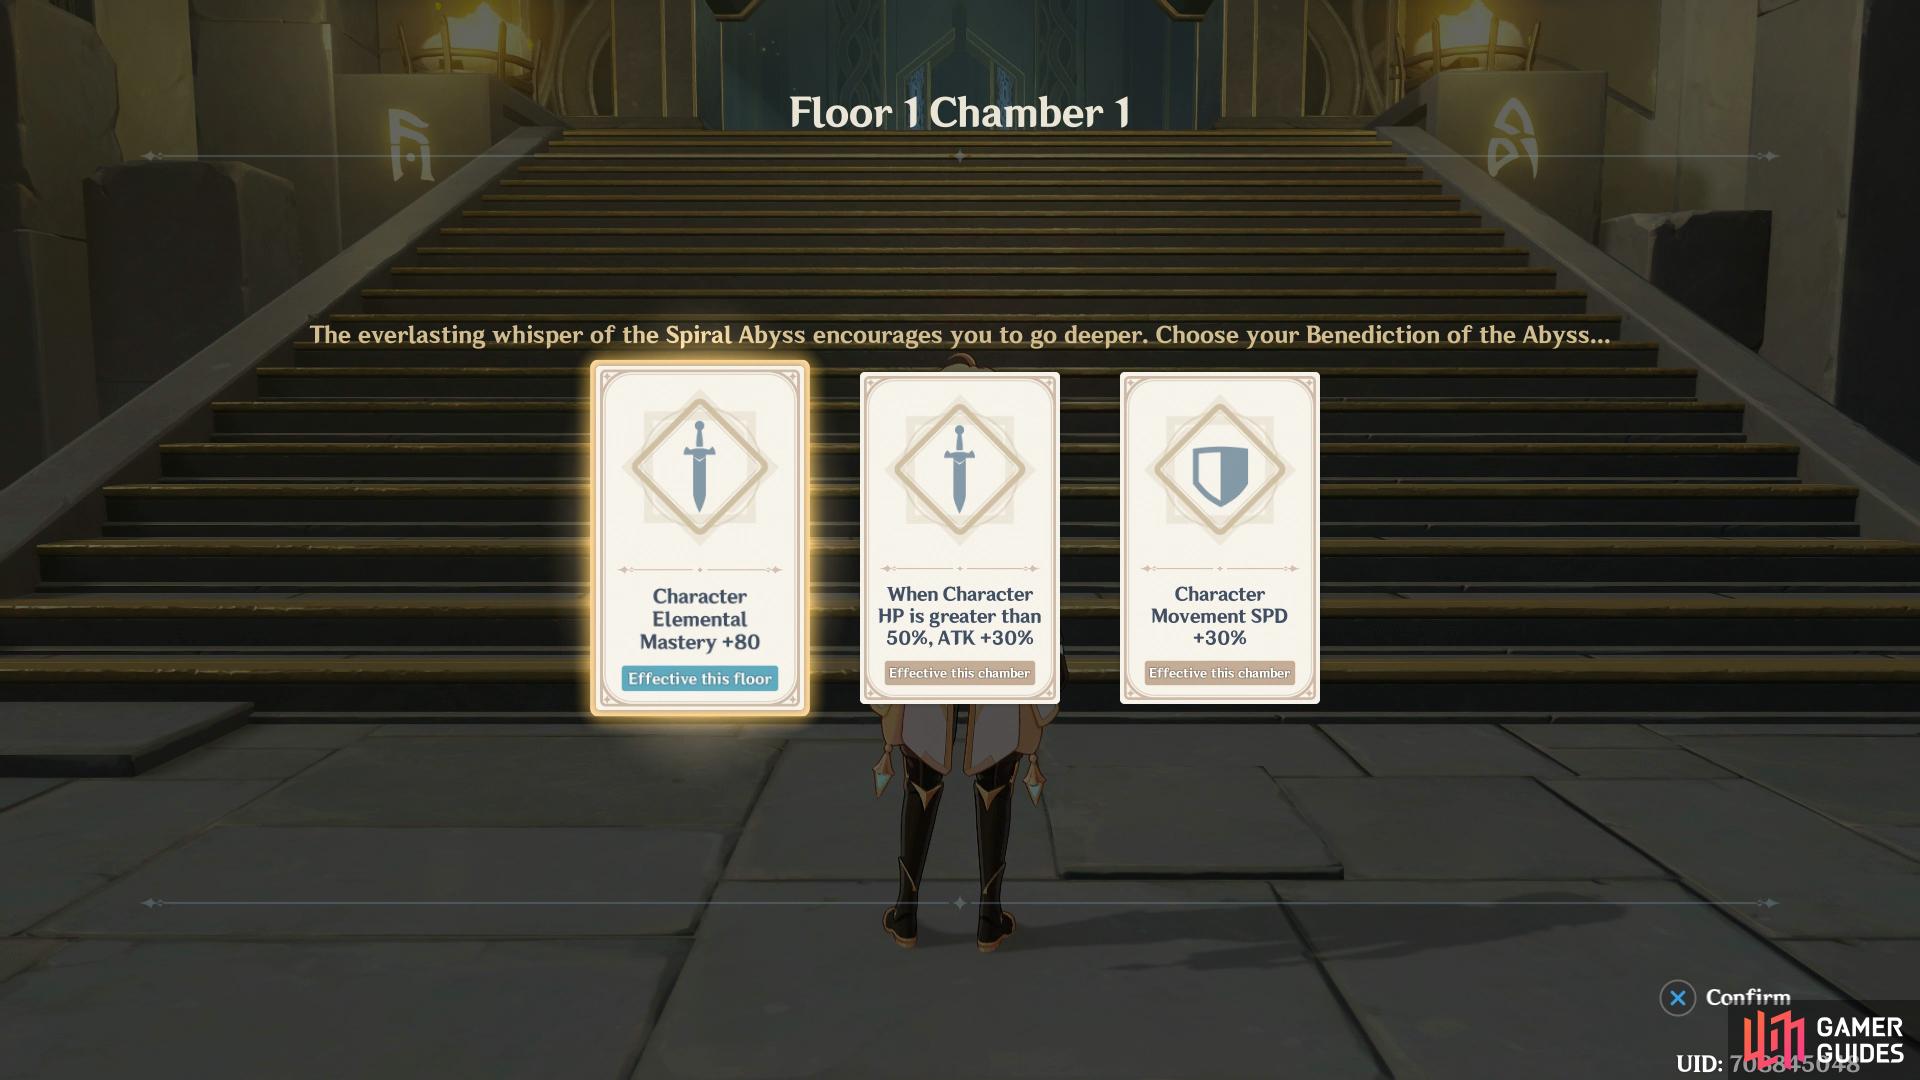 you can choose one Benediction after every chamber